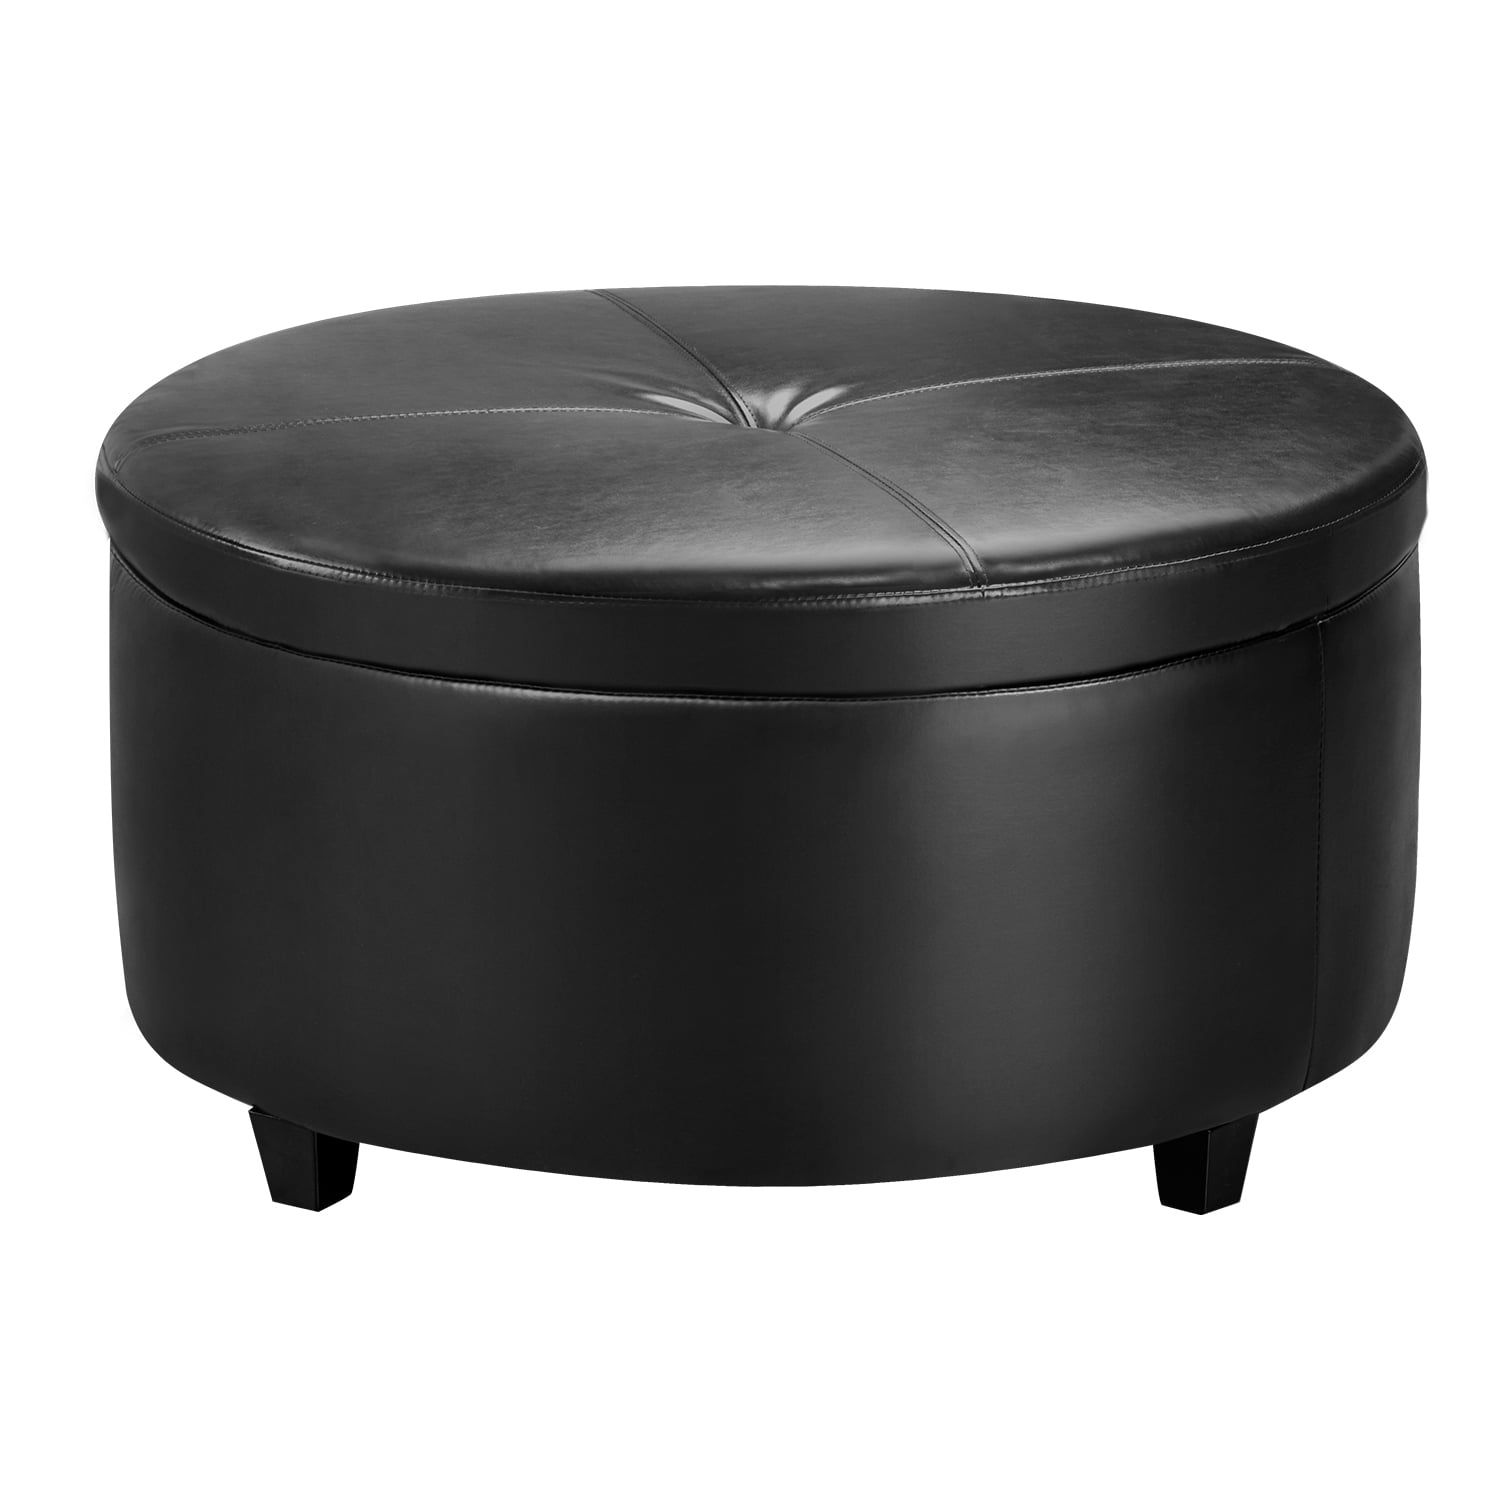 Lacoo Large Round Storage Ottoman Comfort Footrest, Black Faux Leather –  Walmart In Black Faux Leather Ottomans (View 7 of 15)